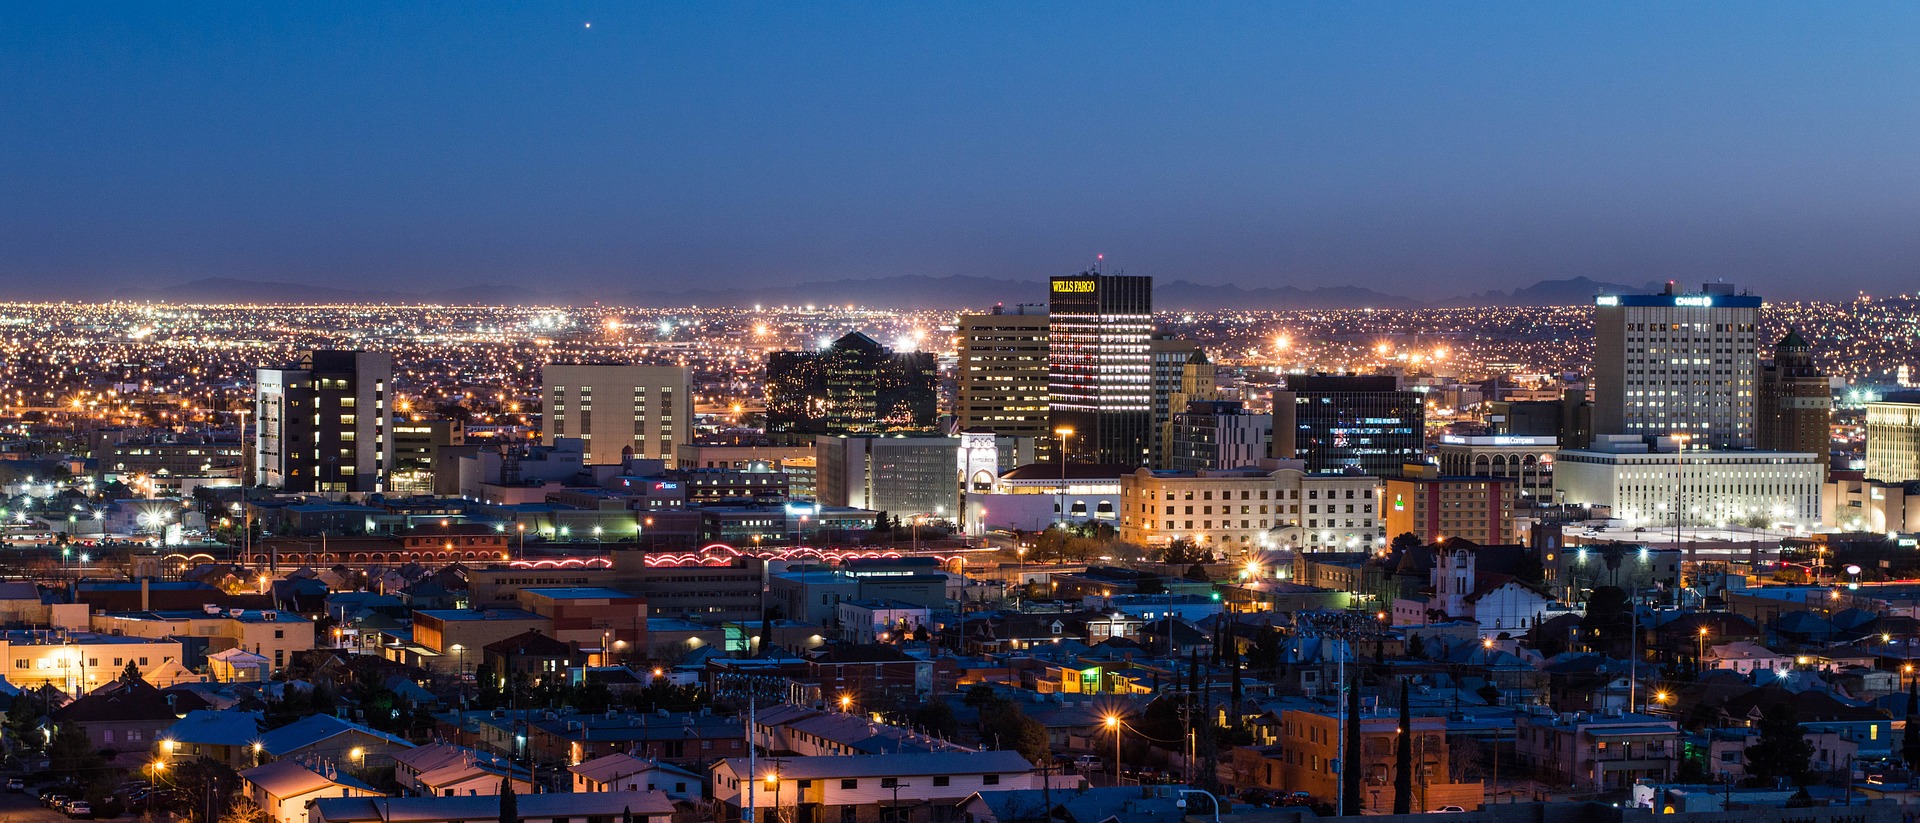 The city of El Paso is looking lively & lit up at night, covered by the bright blue sky.